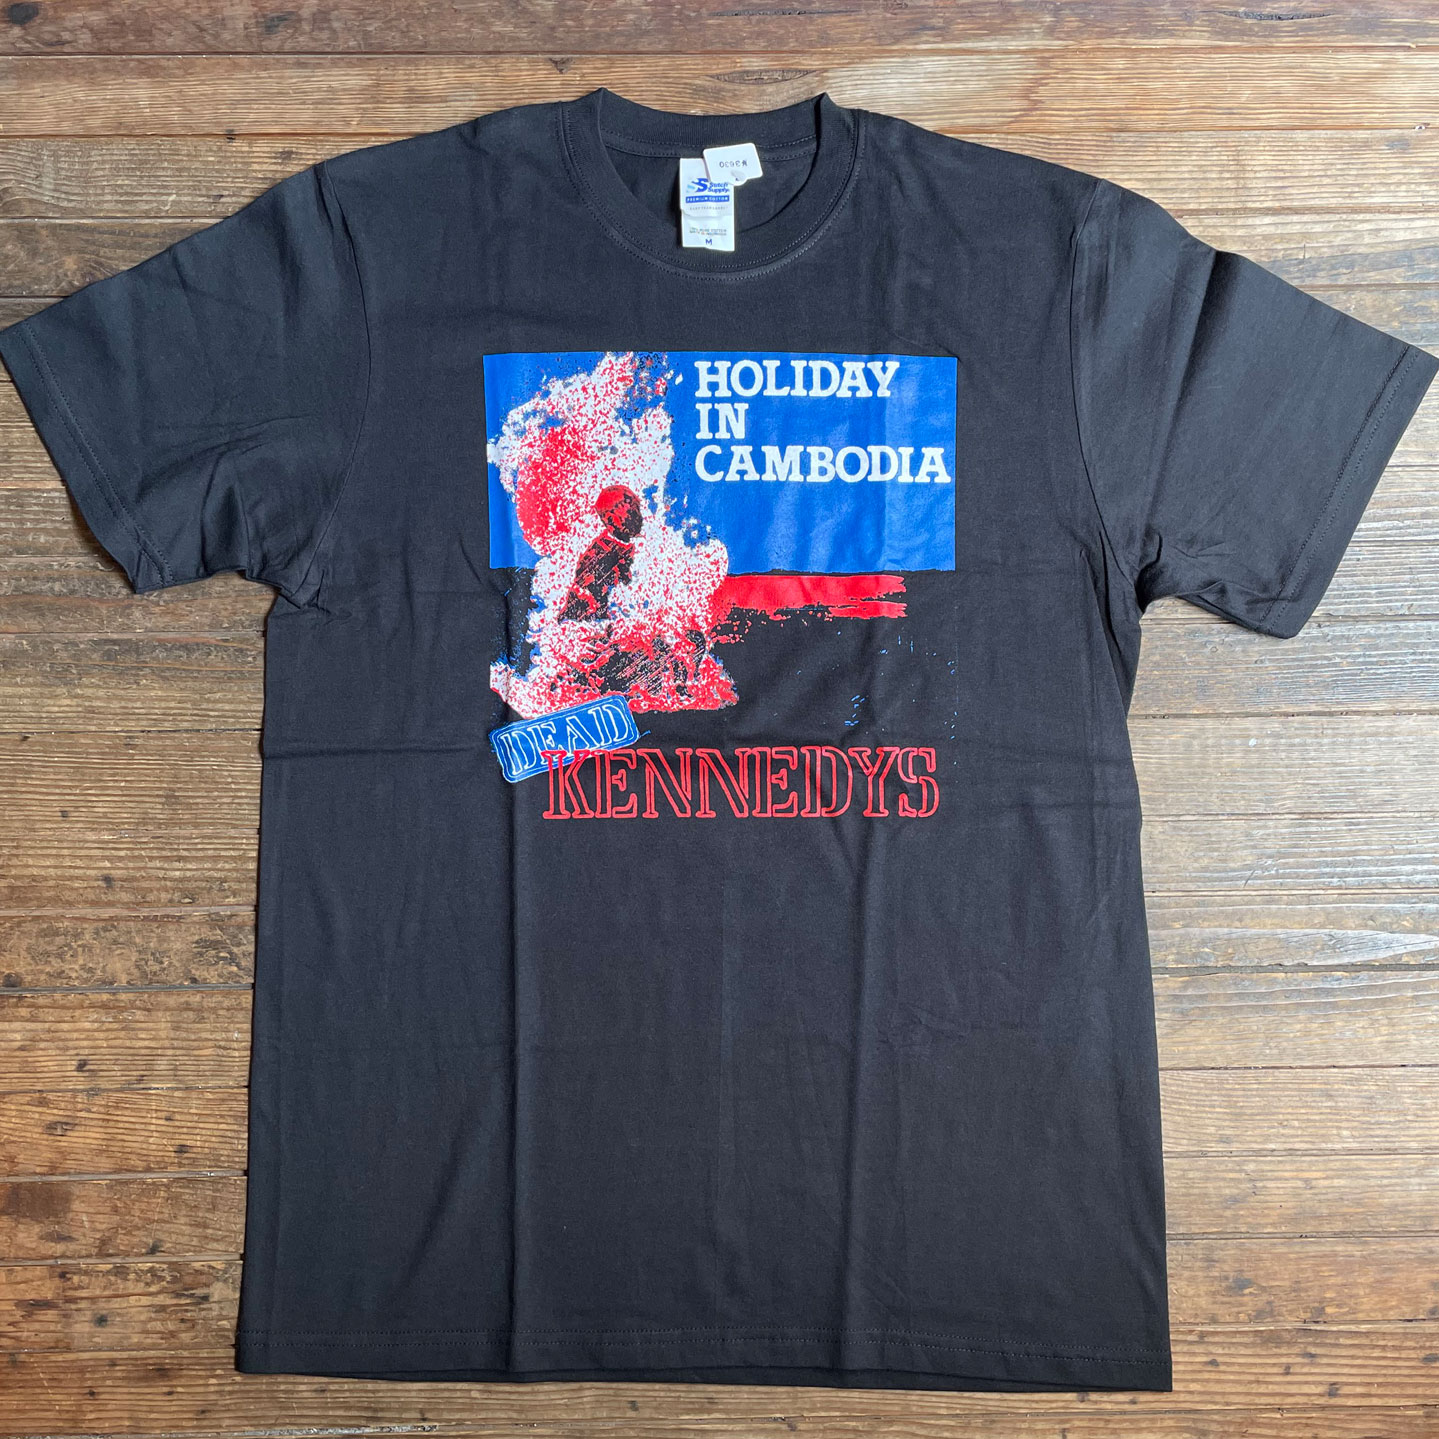 DEAD KENNEDYS Tシャツ HOLIDAY IN CAMBODIA BLACK